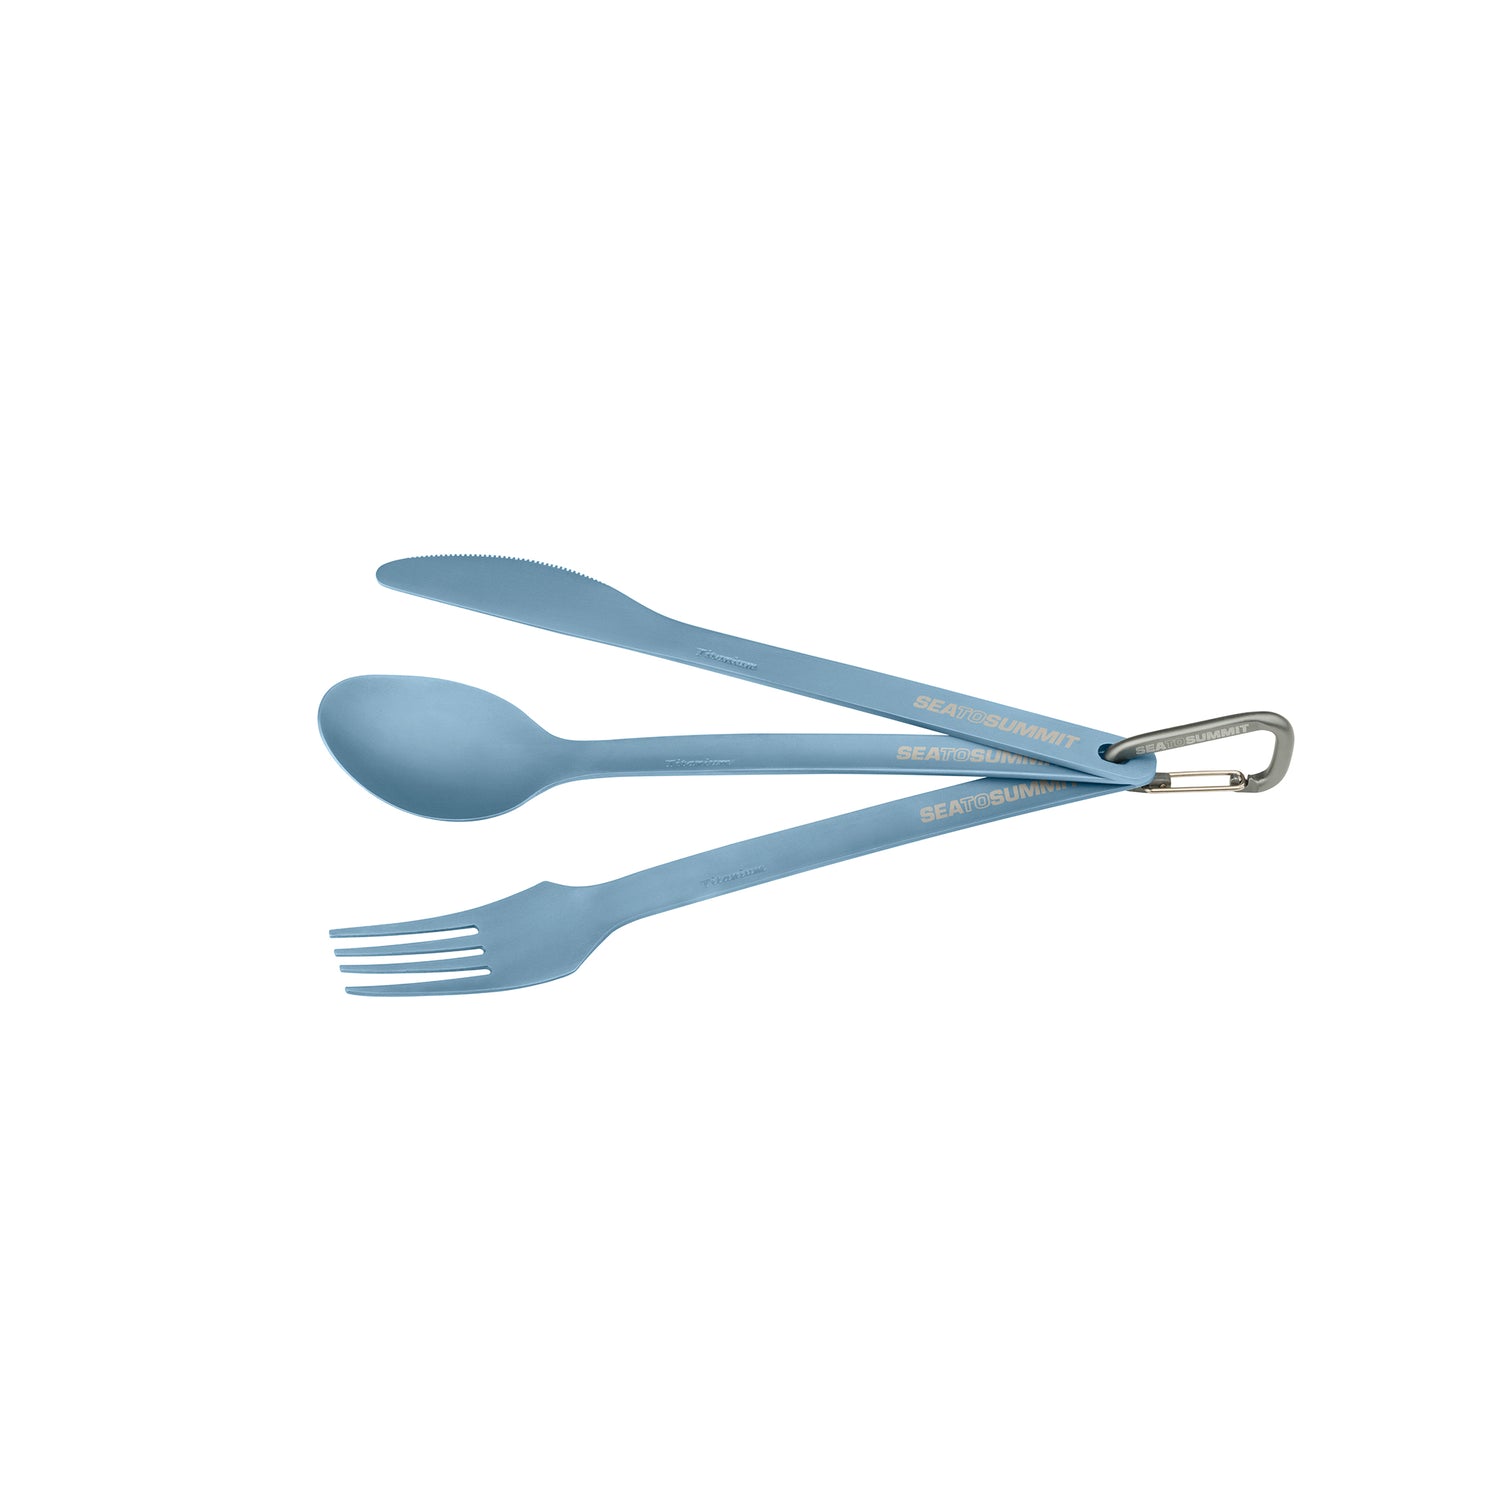 Titanium 3-Piece Cutlery Set (Knife, Fork and Spoon)